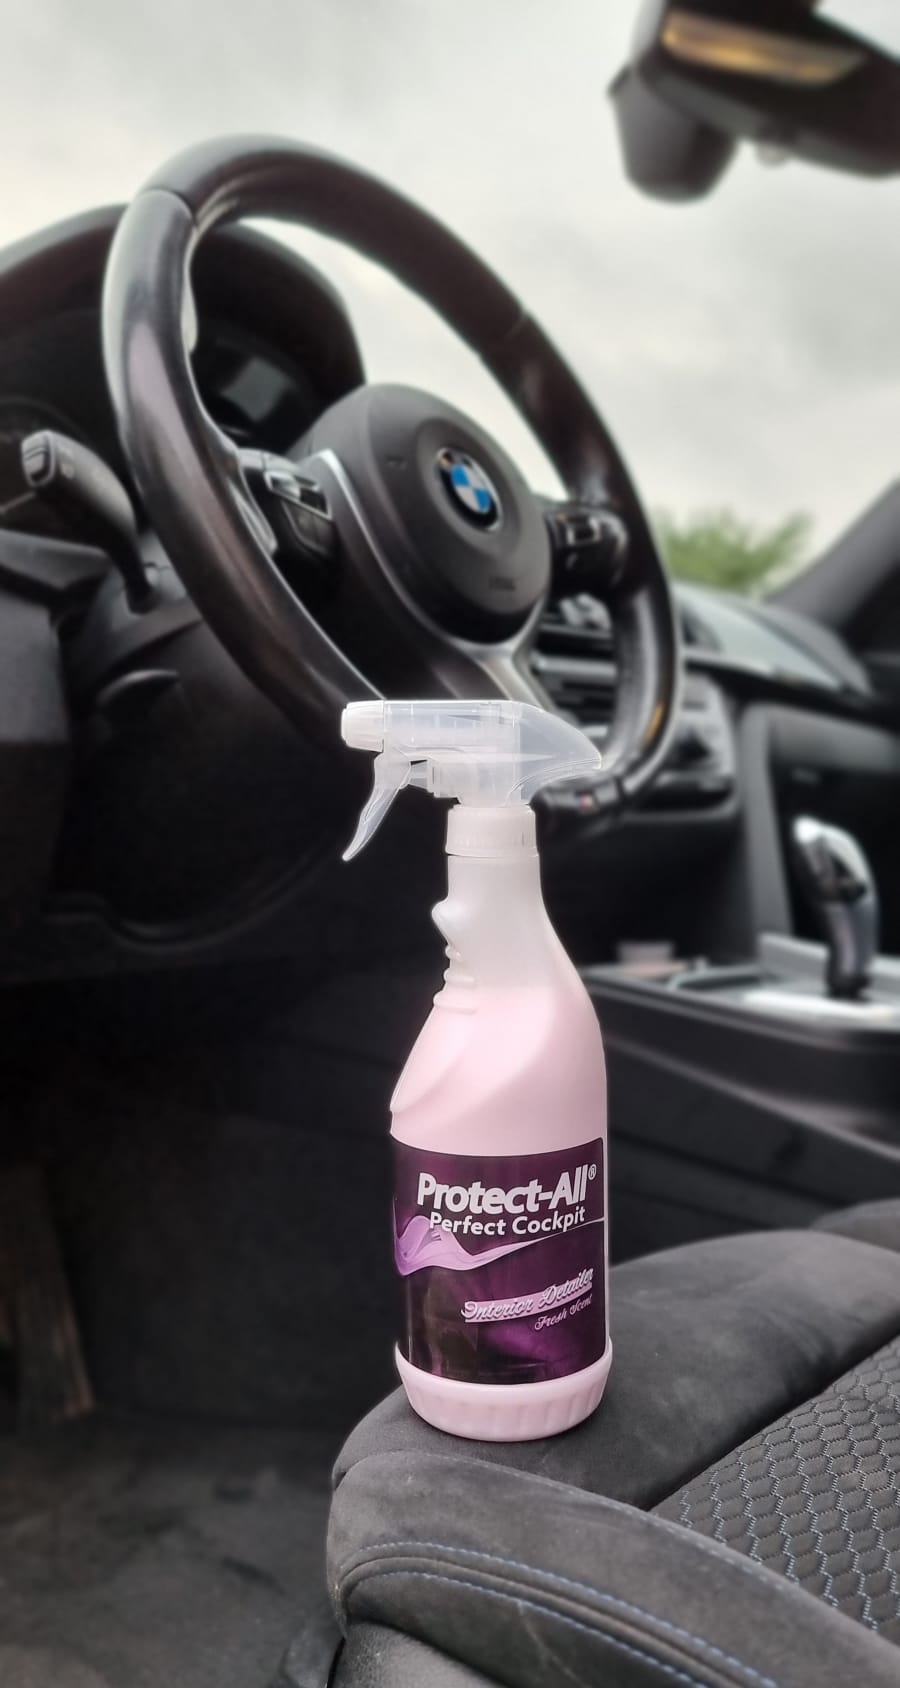 Protect-All Interior pack